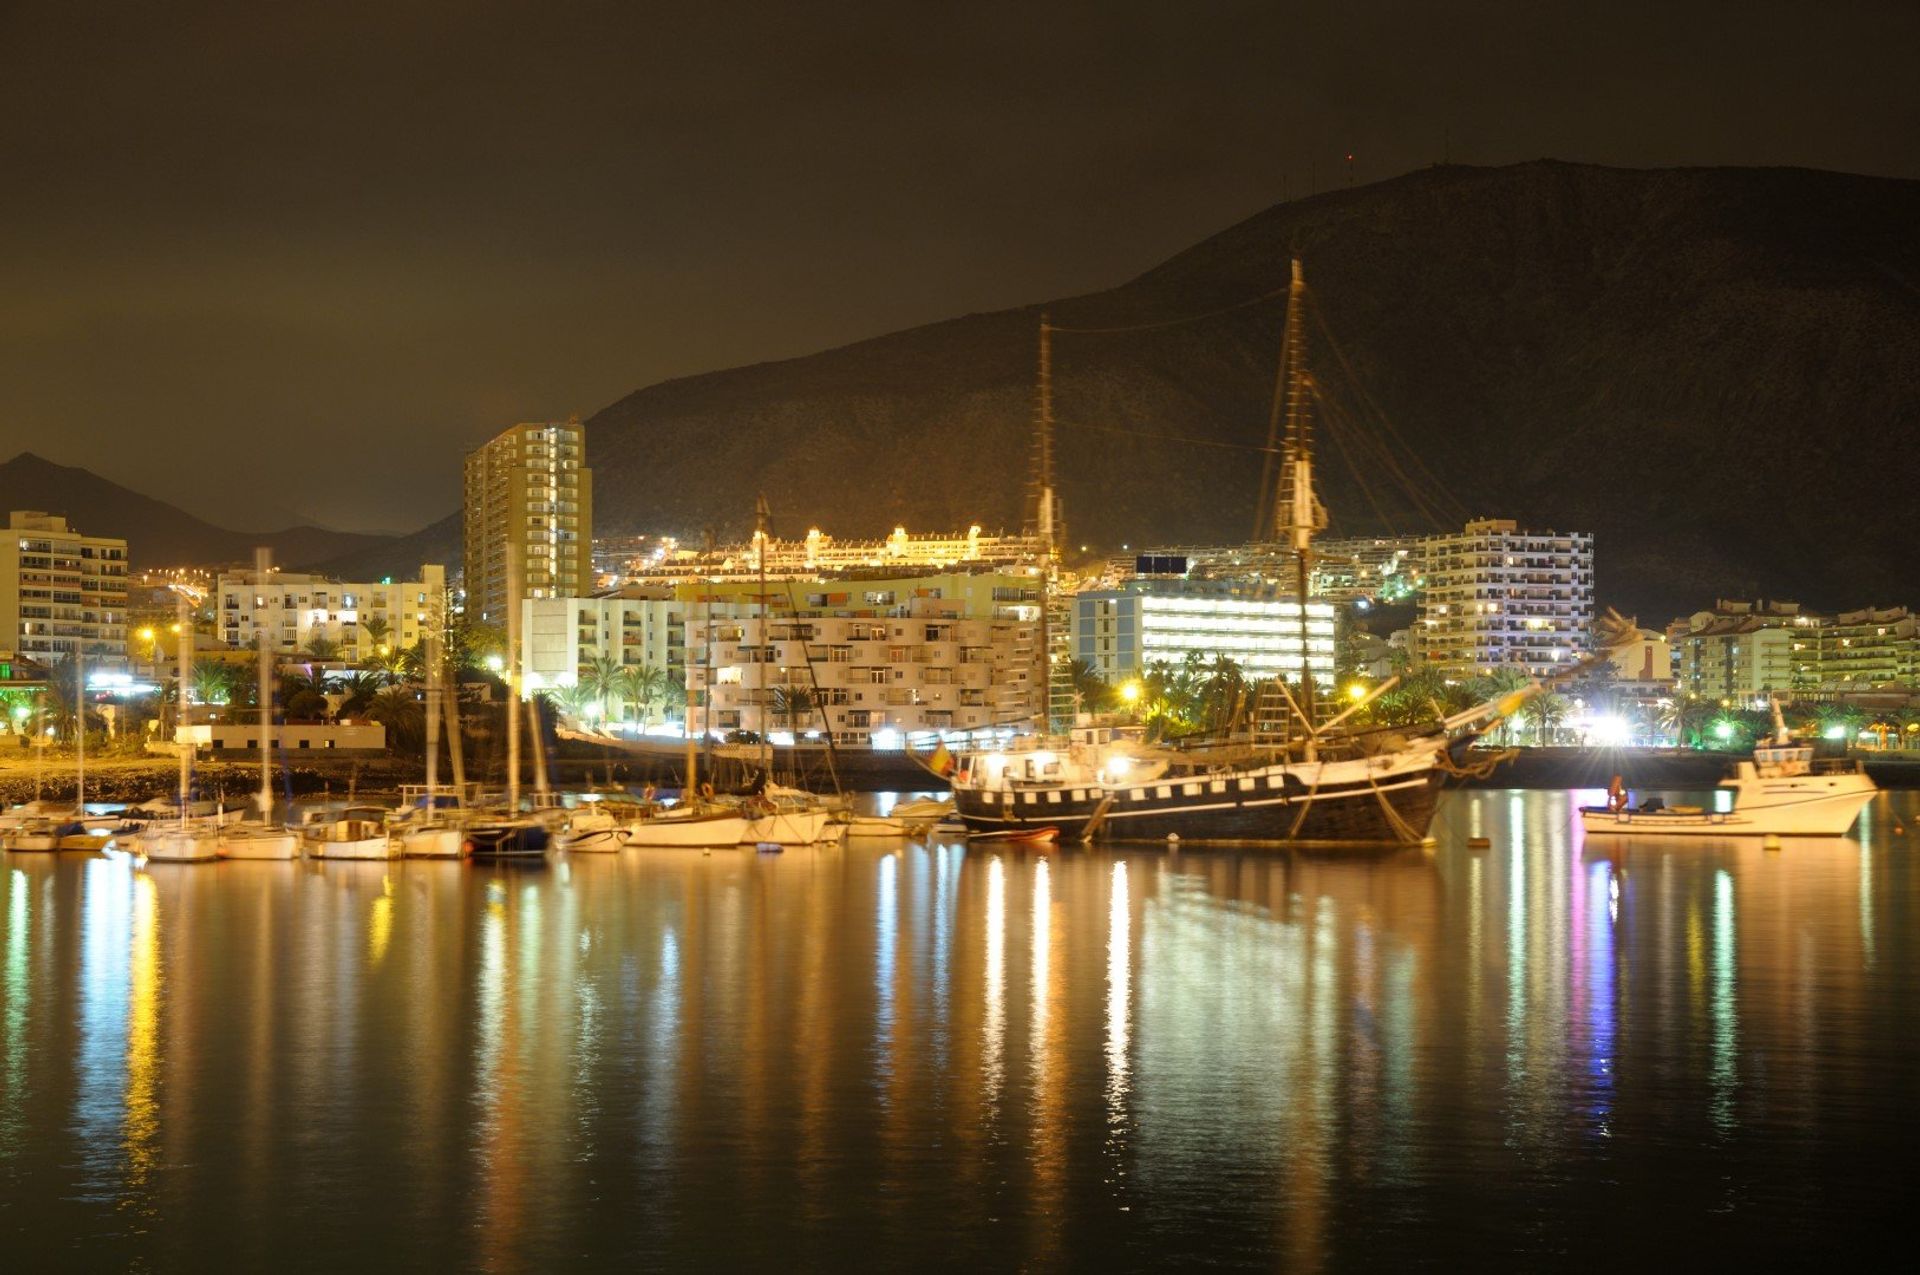 Los Cristianos harbour under the night sky